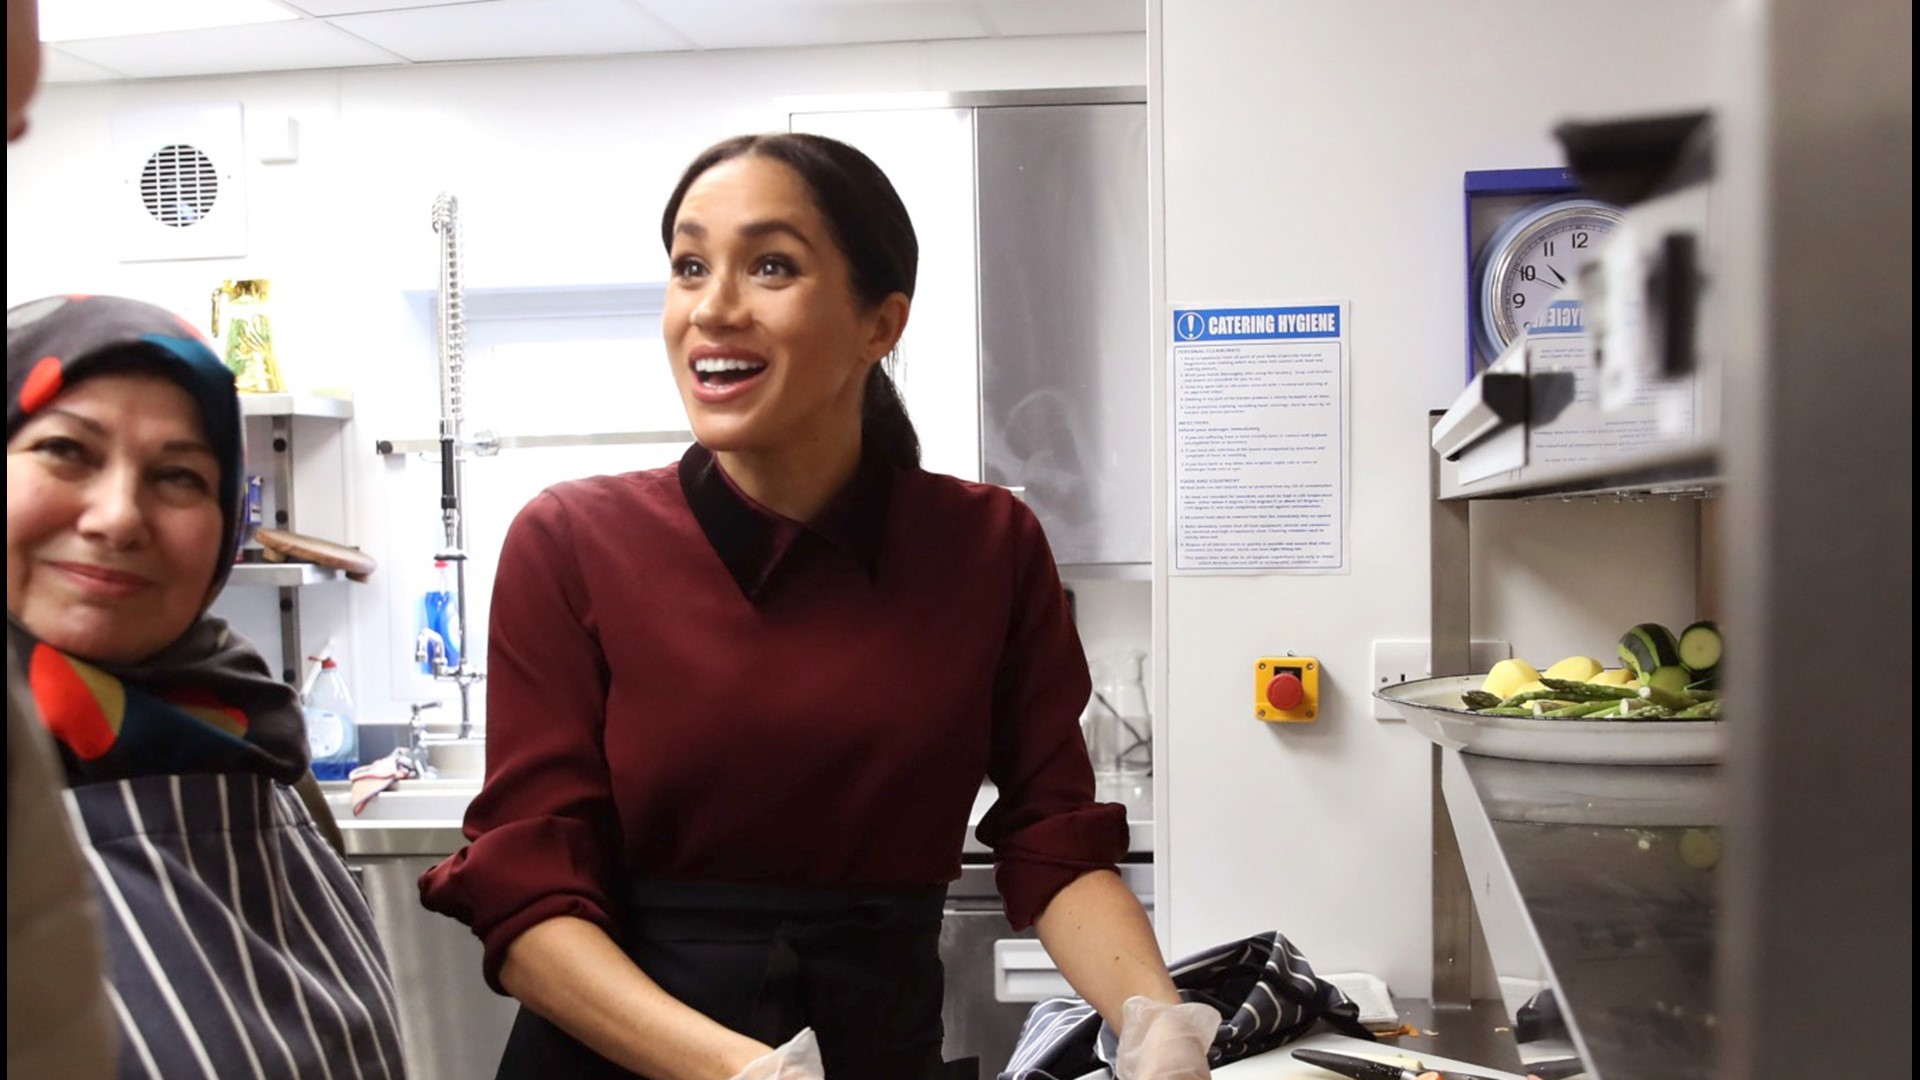 Prince Harry and Meghan Markle have announced another new venture, this time with World Central Kitchen. Buzz60's Keri Lumm has more.